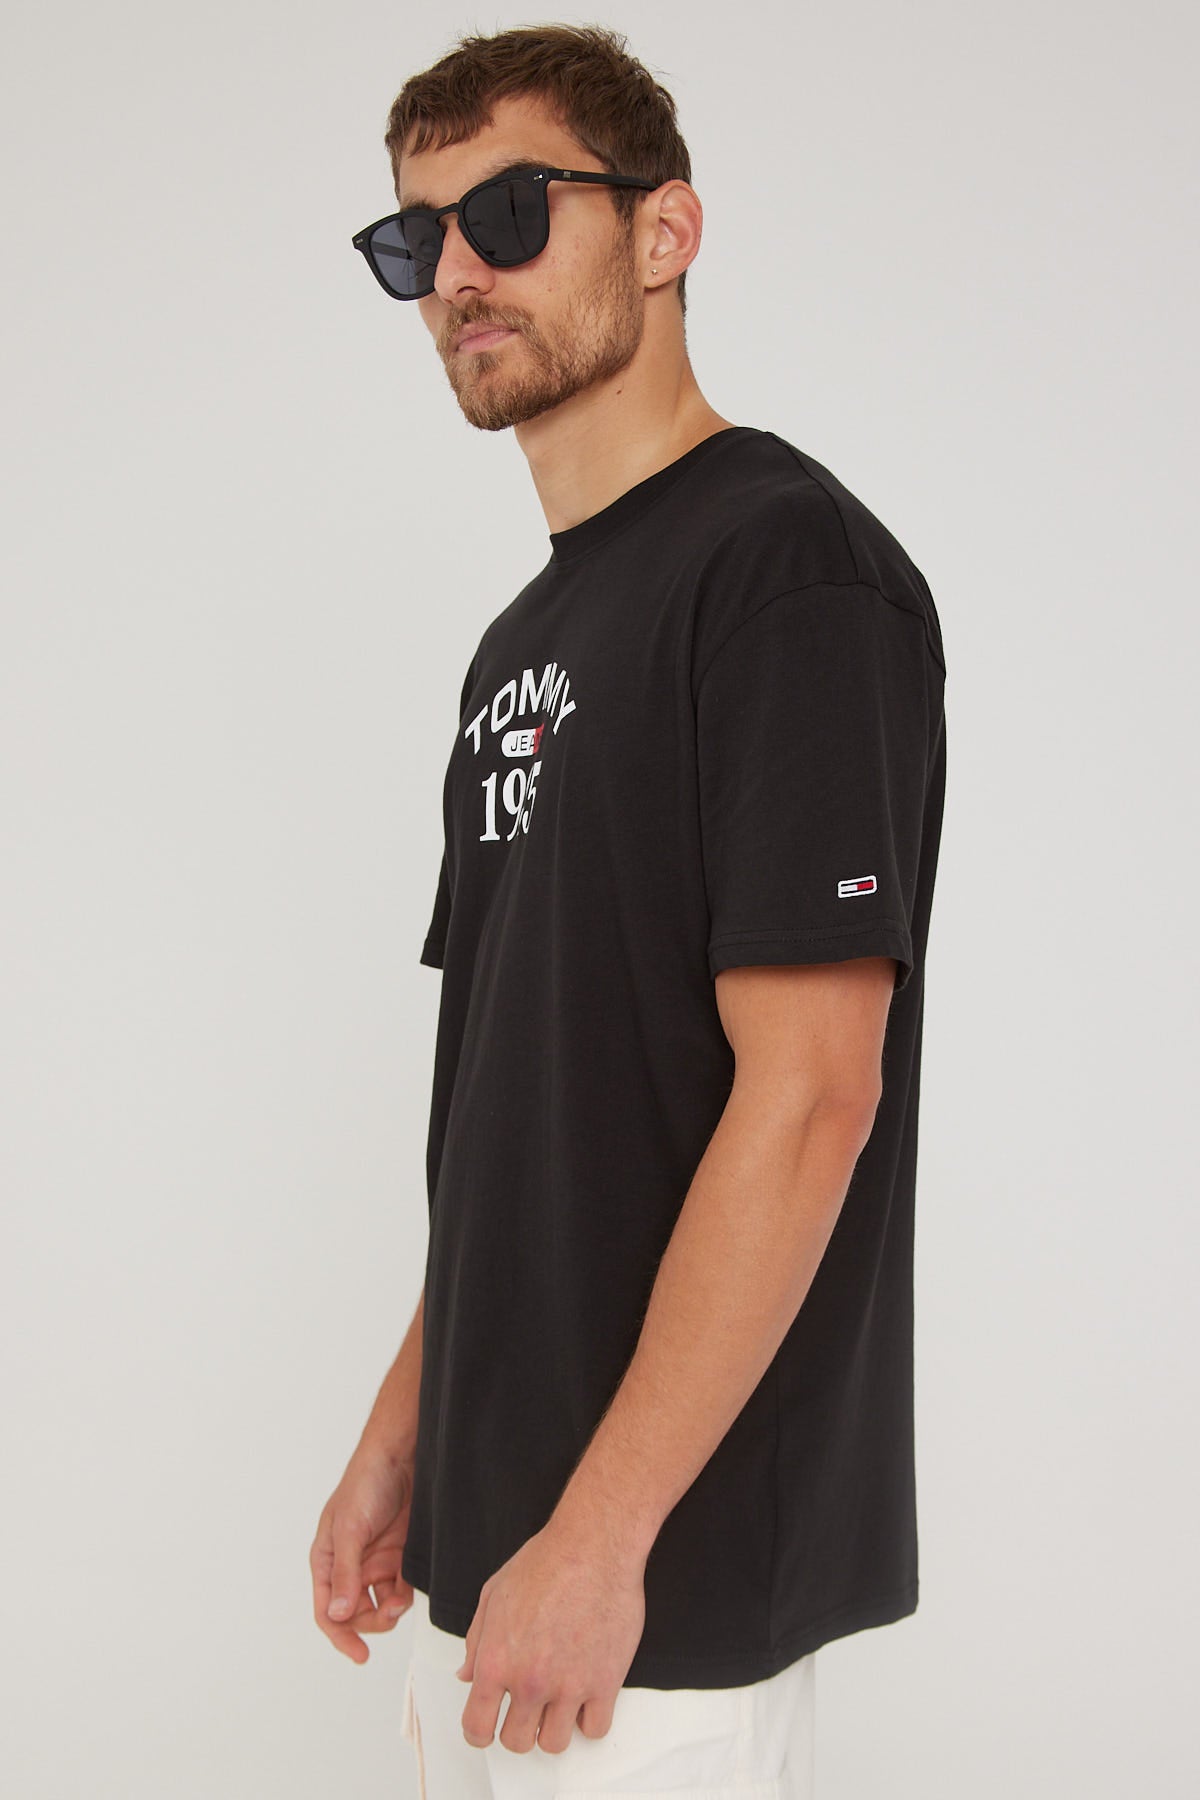 Jeans White – RBW Skater Universal TJM Tommy College Store Tee